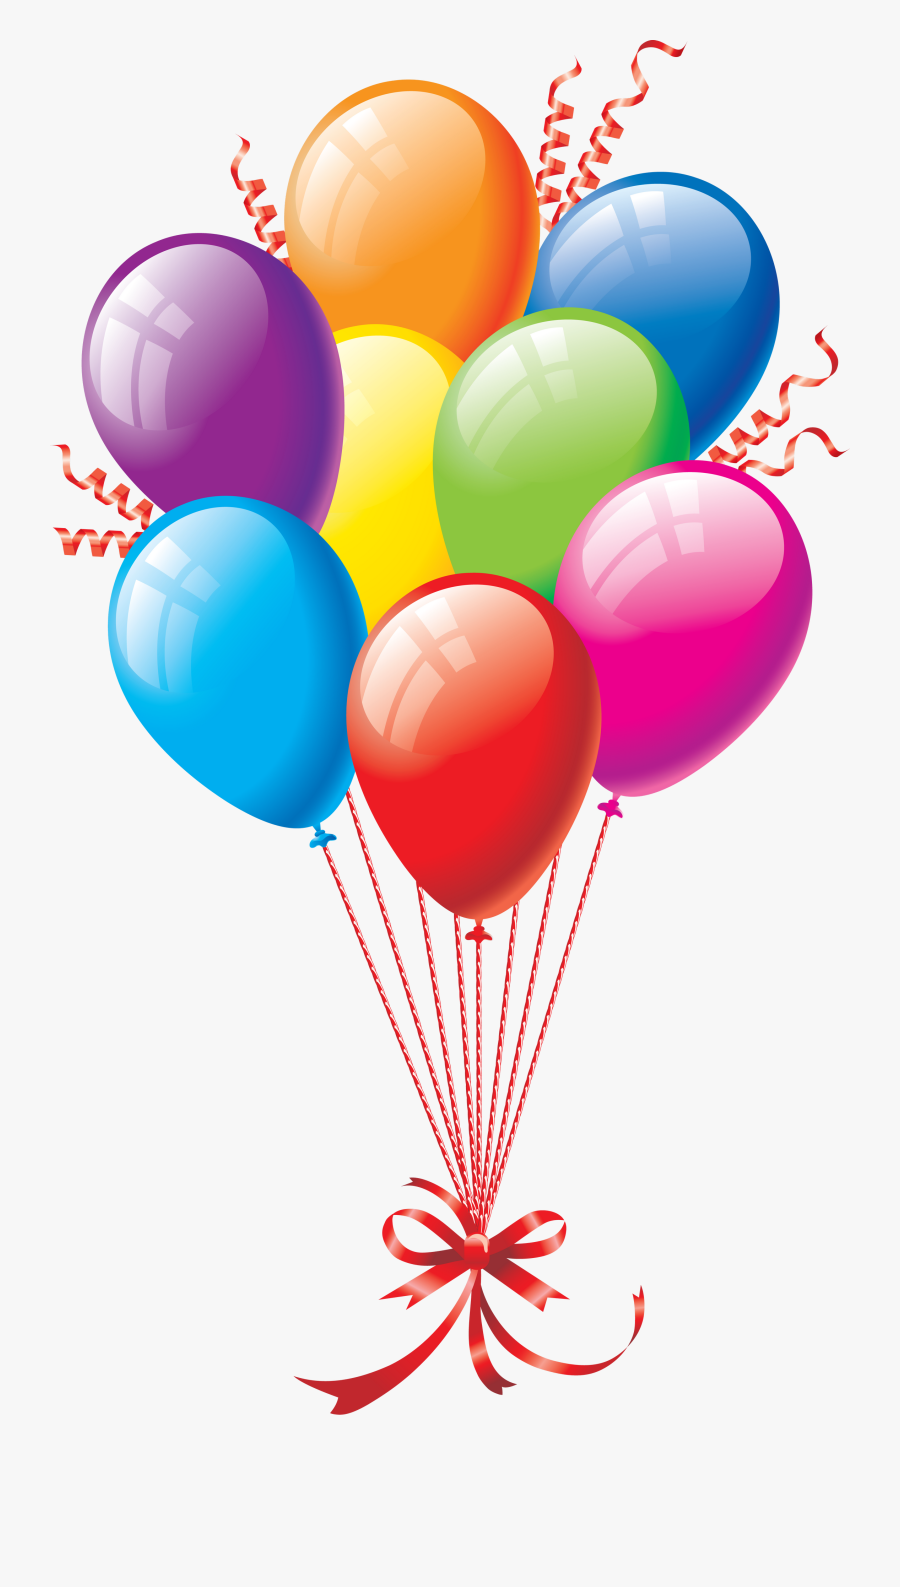 Happy Birthday Background Png, Transparent Clipart